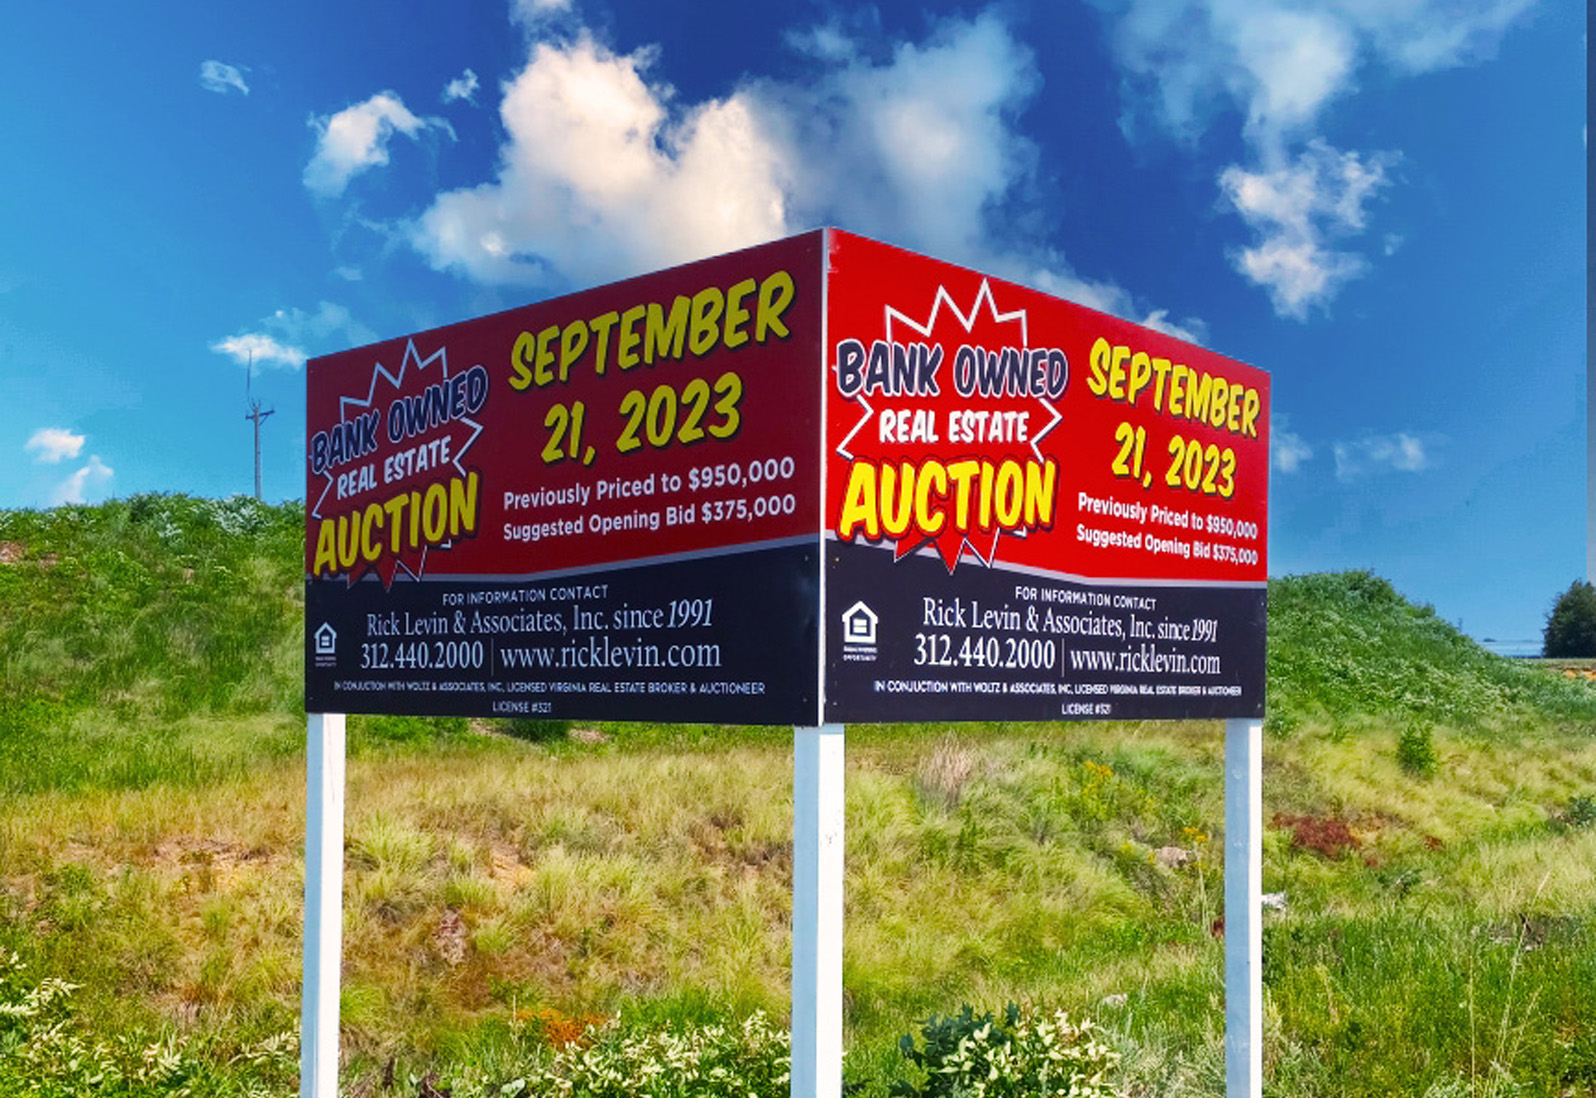 Eye-catching red and black roadside sign by Distinct Sign Solution announces a bank-owned real estate auction with a clear visual hierarchy. The date of the event is prominently displayed in large, bold typeface at the top, while contact information is neatly arranged below, demonstrating how structured information flow leads to an effective and informative sign design.